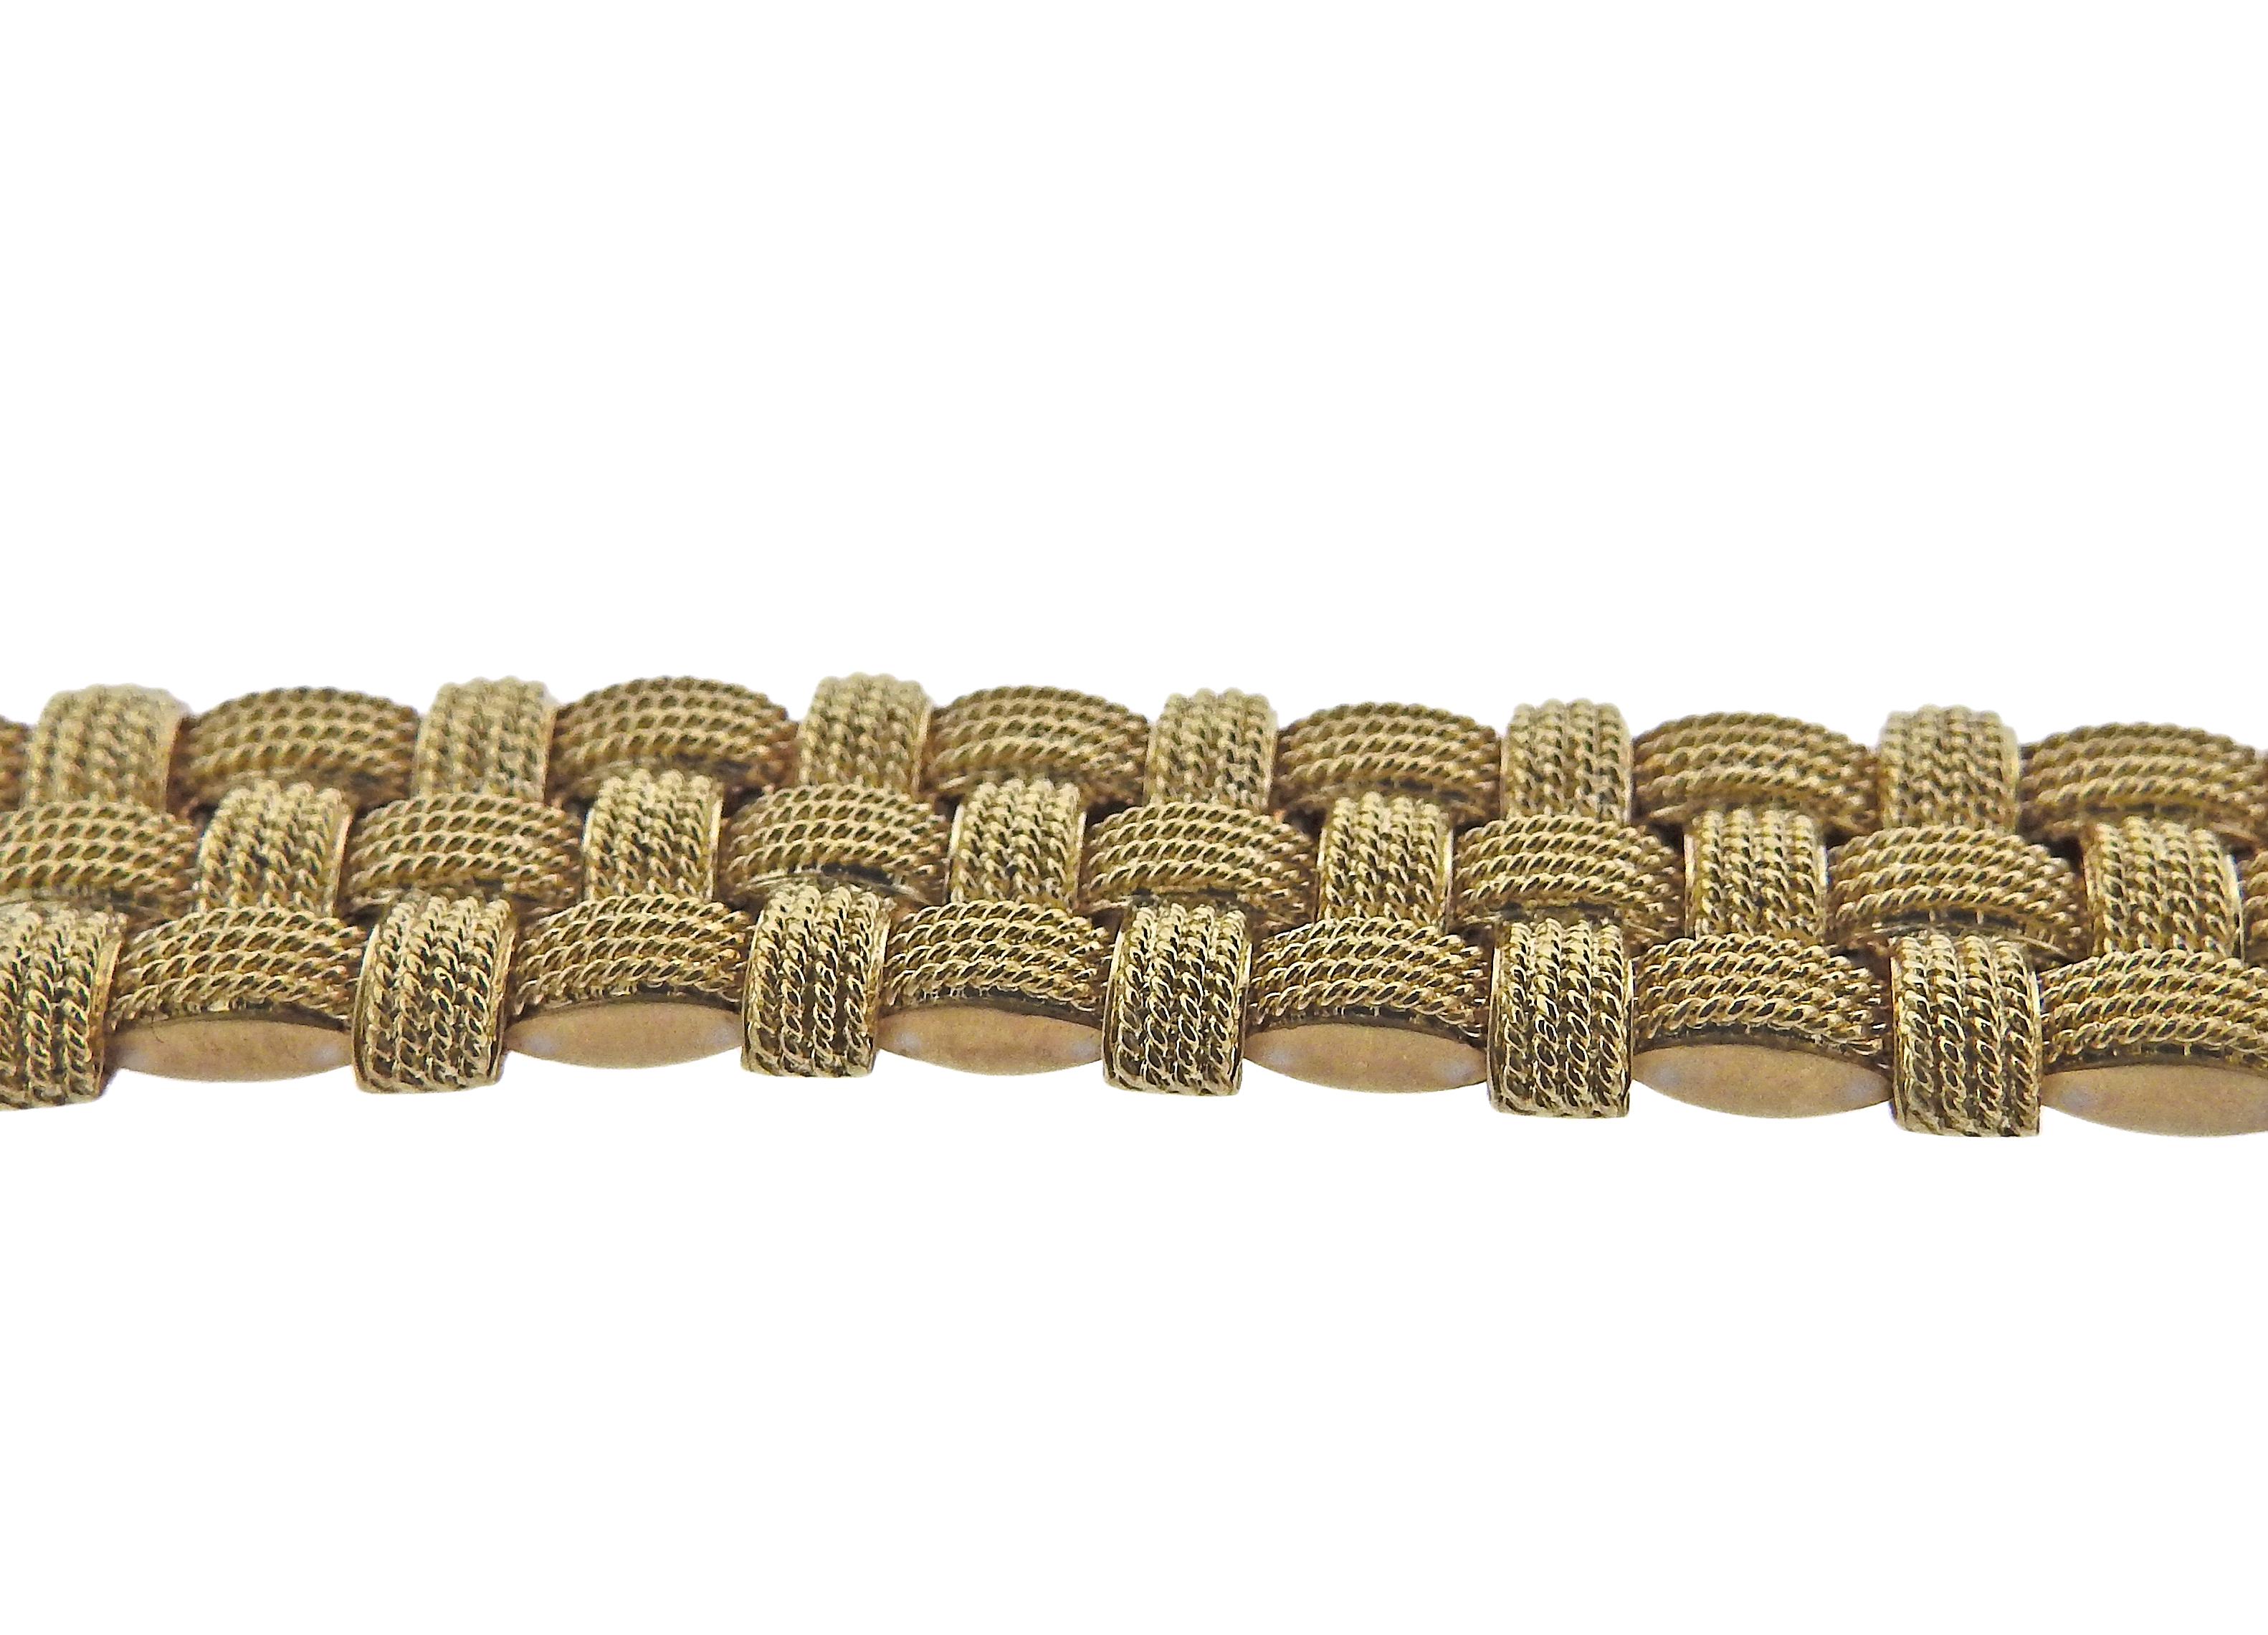 18k gold Appassionata bracelet by Roberto Coin, with approx. 0.21ctw G/VS diamonds.  Bracelet is 6 7/8